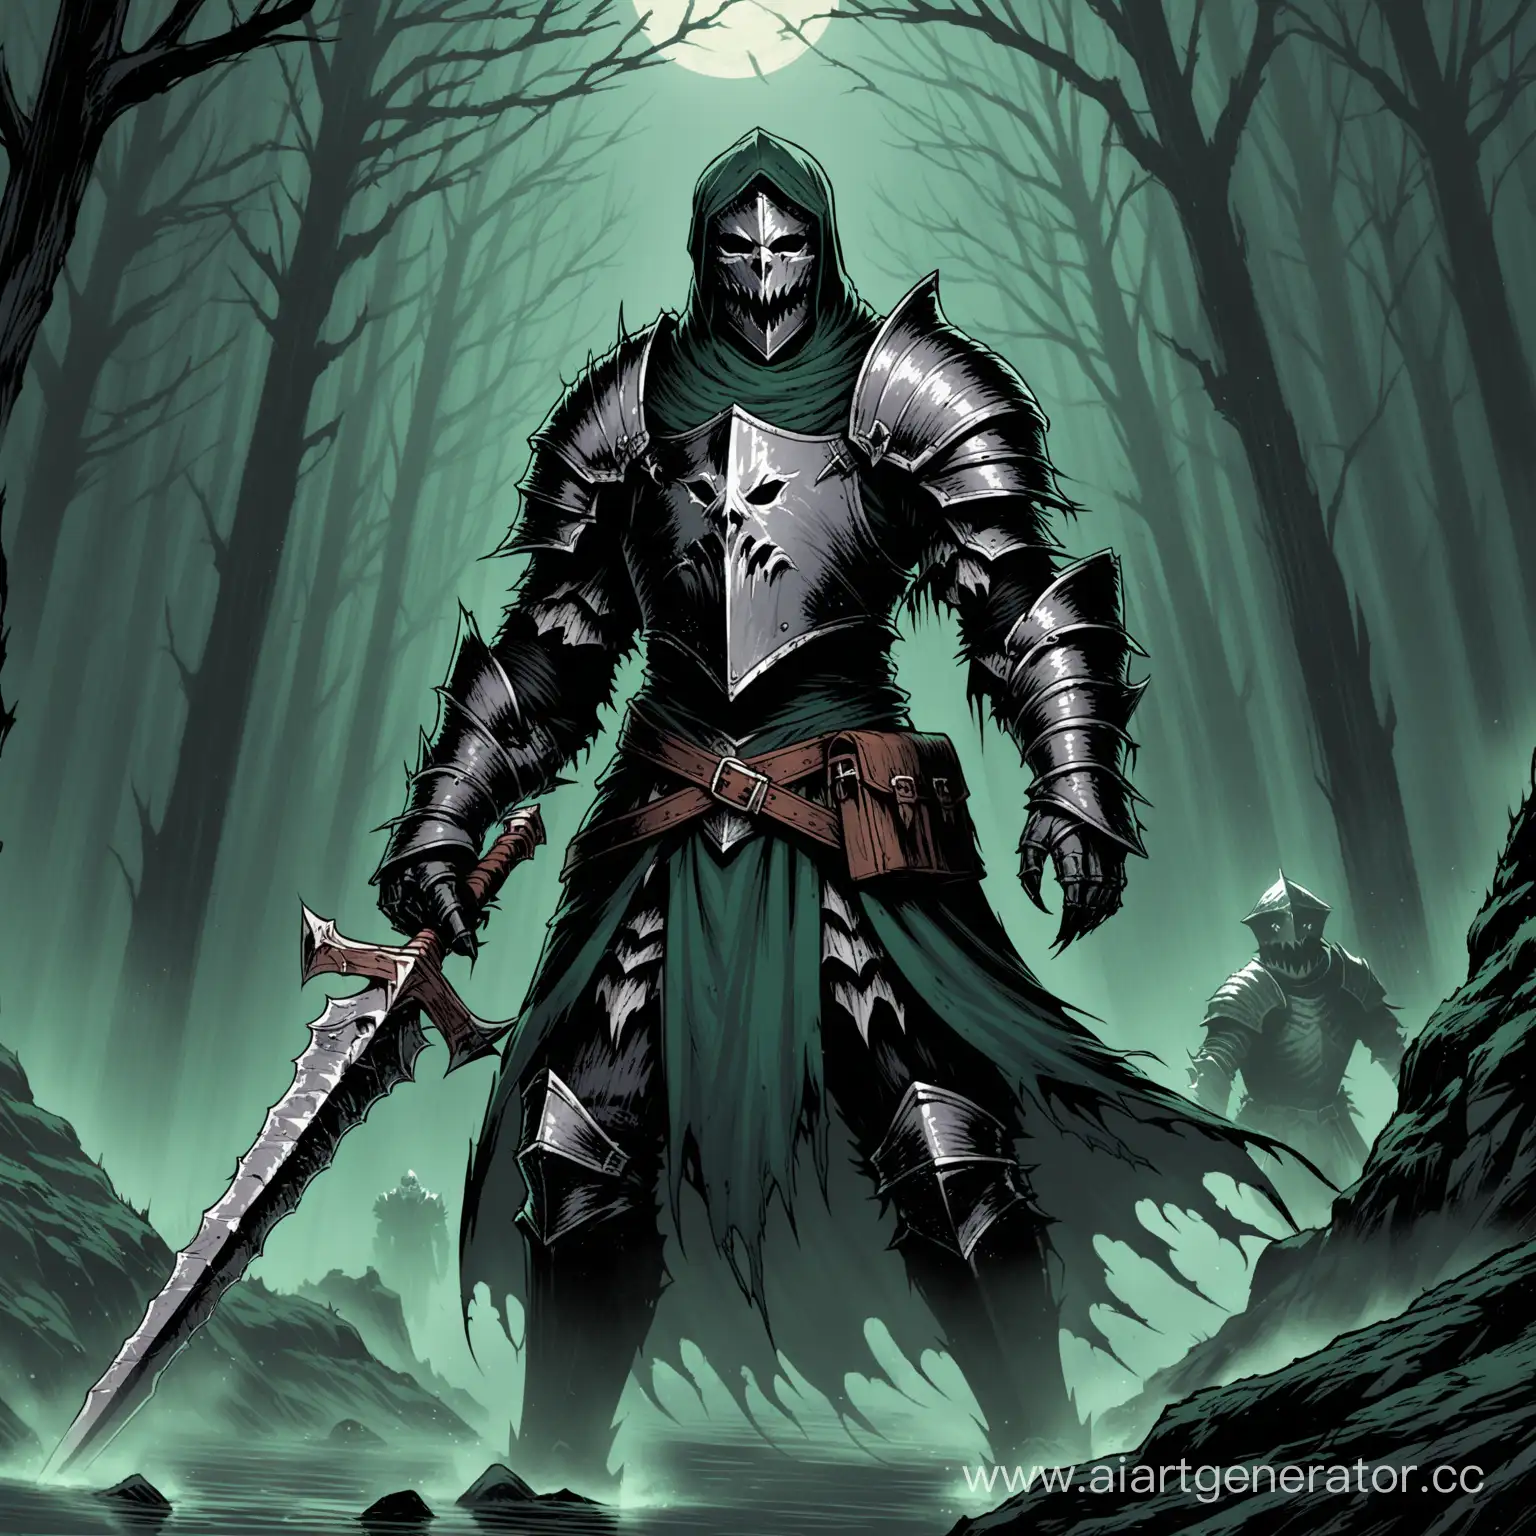 Dark-Fantasy-Cursed-Knight-in-Dungeons-and-Dragons-Setting